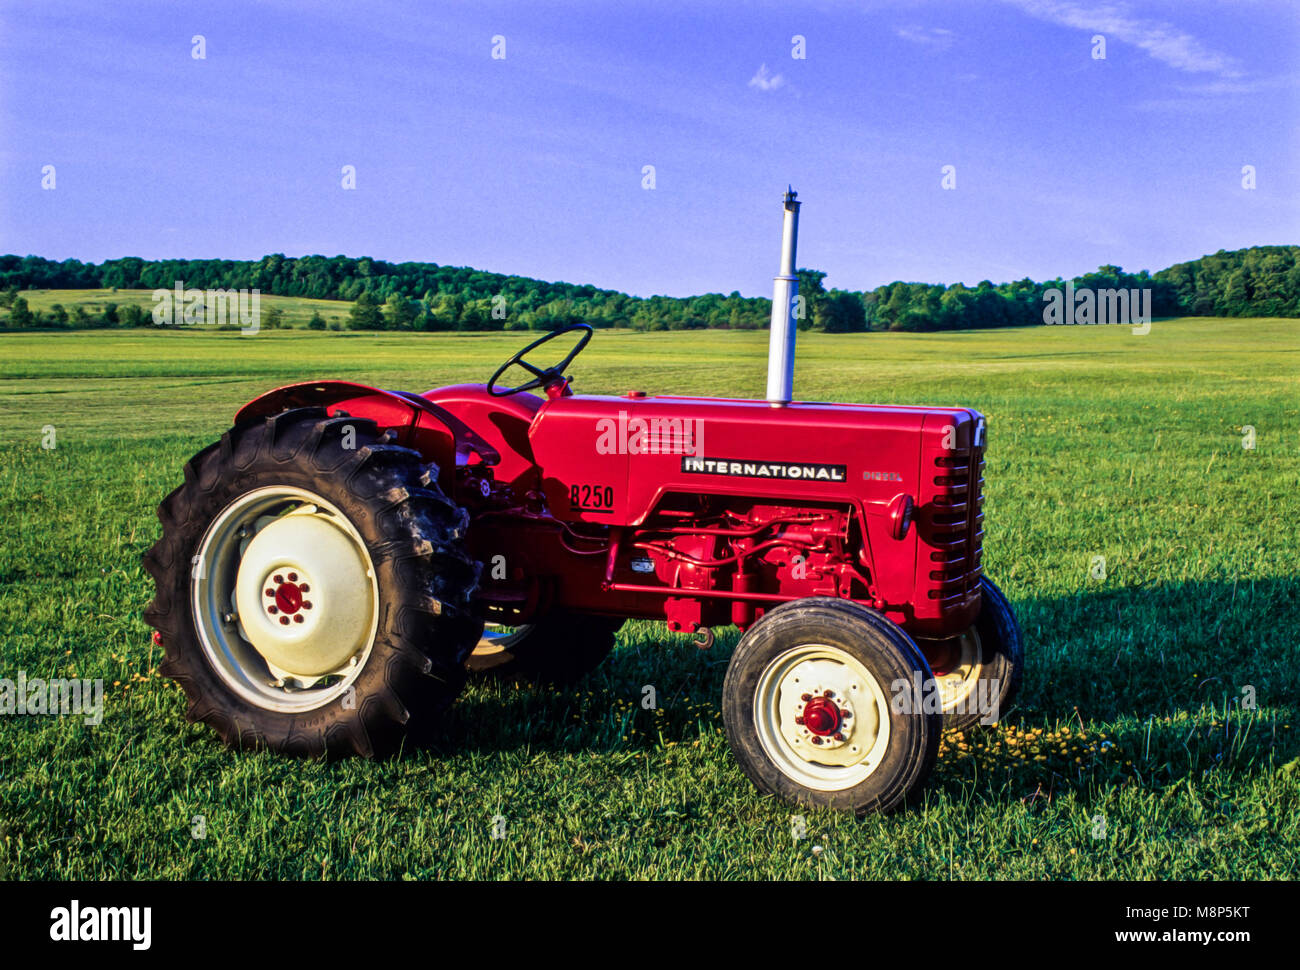 Vintage red international tractor, New York, USA. FS 10.64 MB, vintage tractors antique images NY farmland farm land Stock Photo